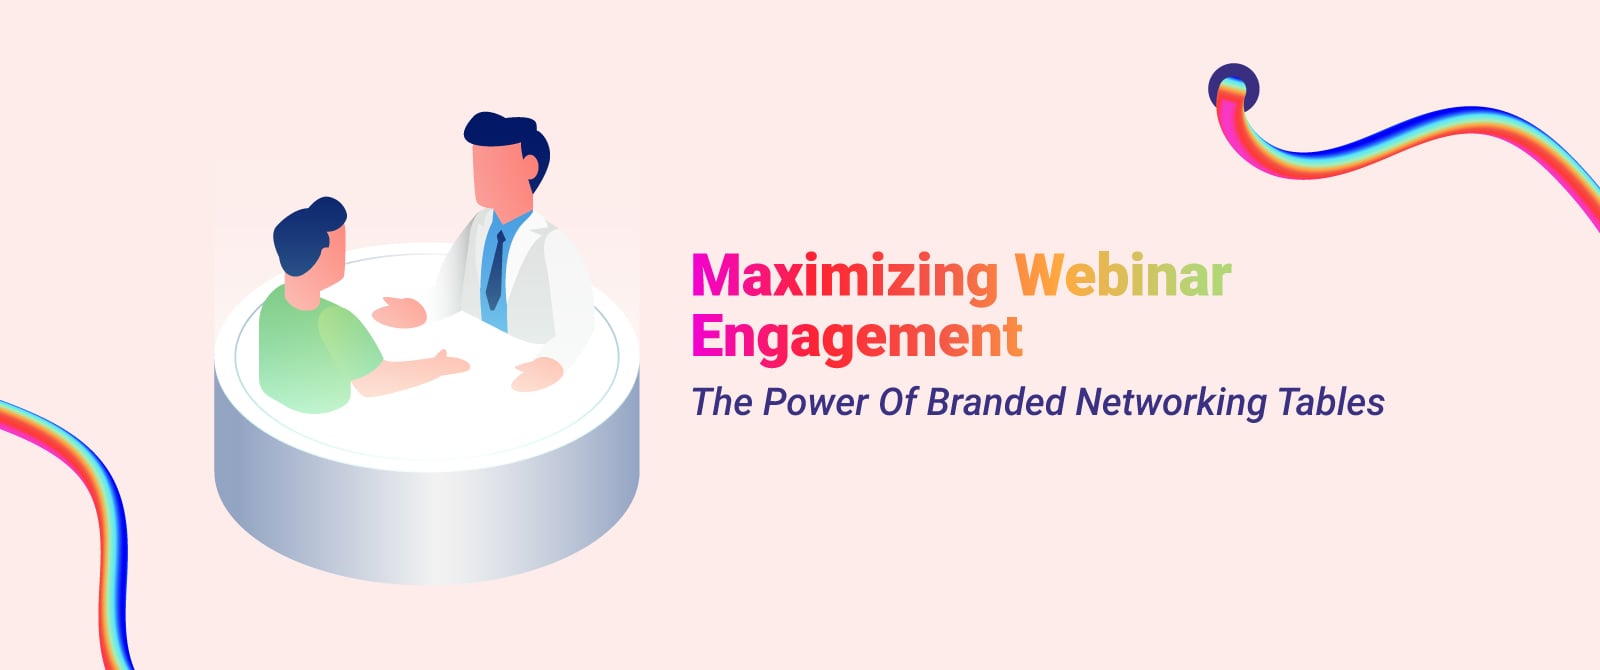 Maximizing Webinar Engagement : The Power of Branded Networking Tables